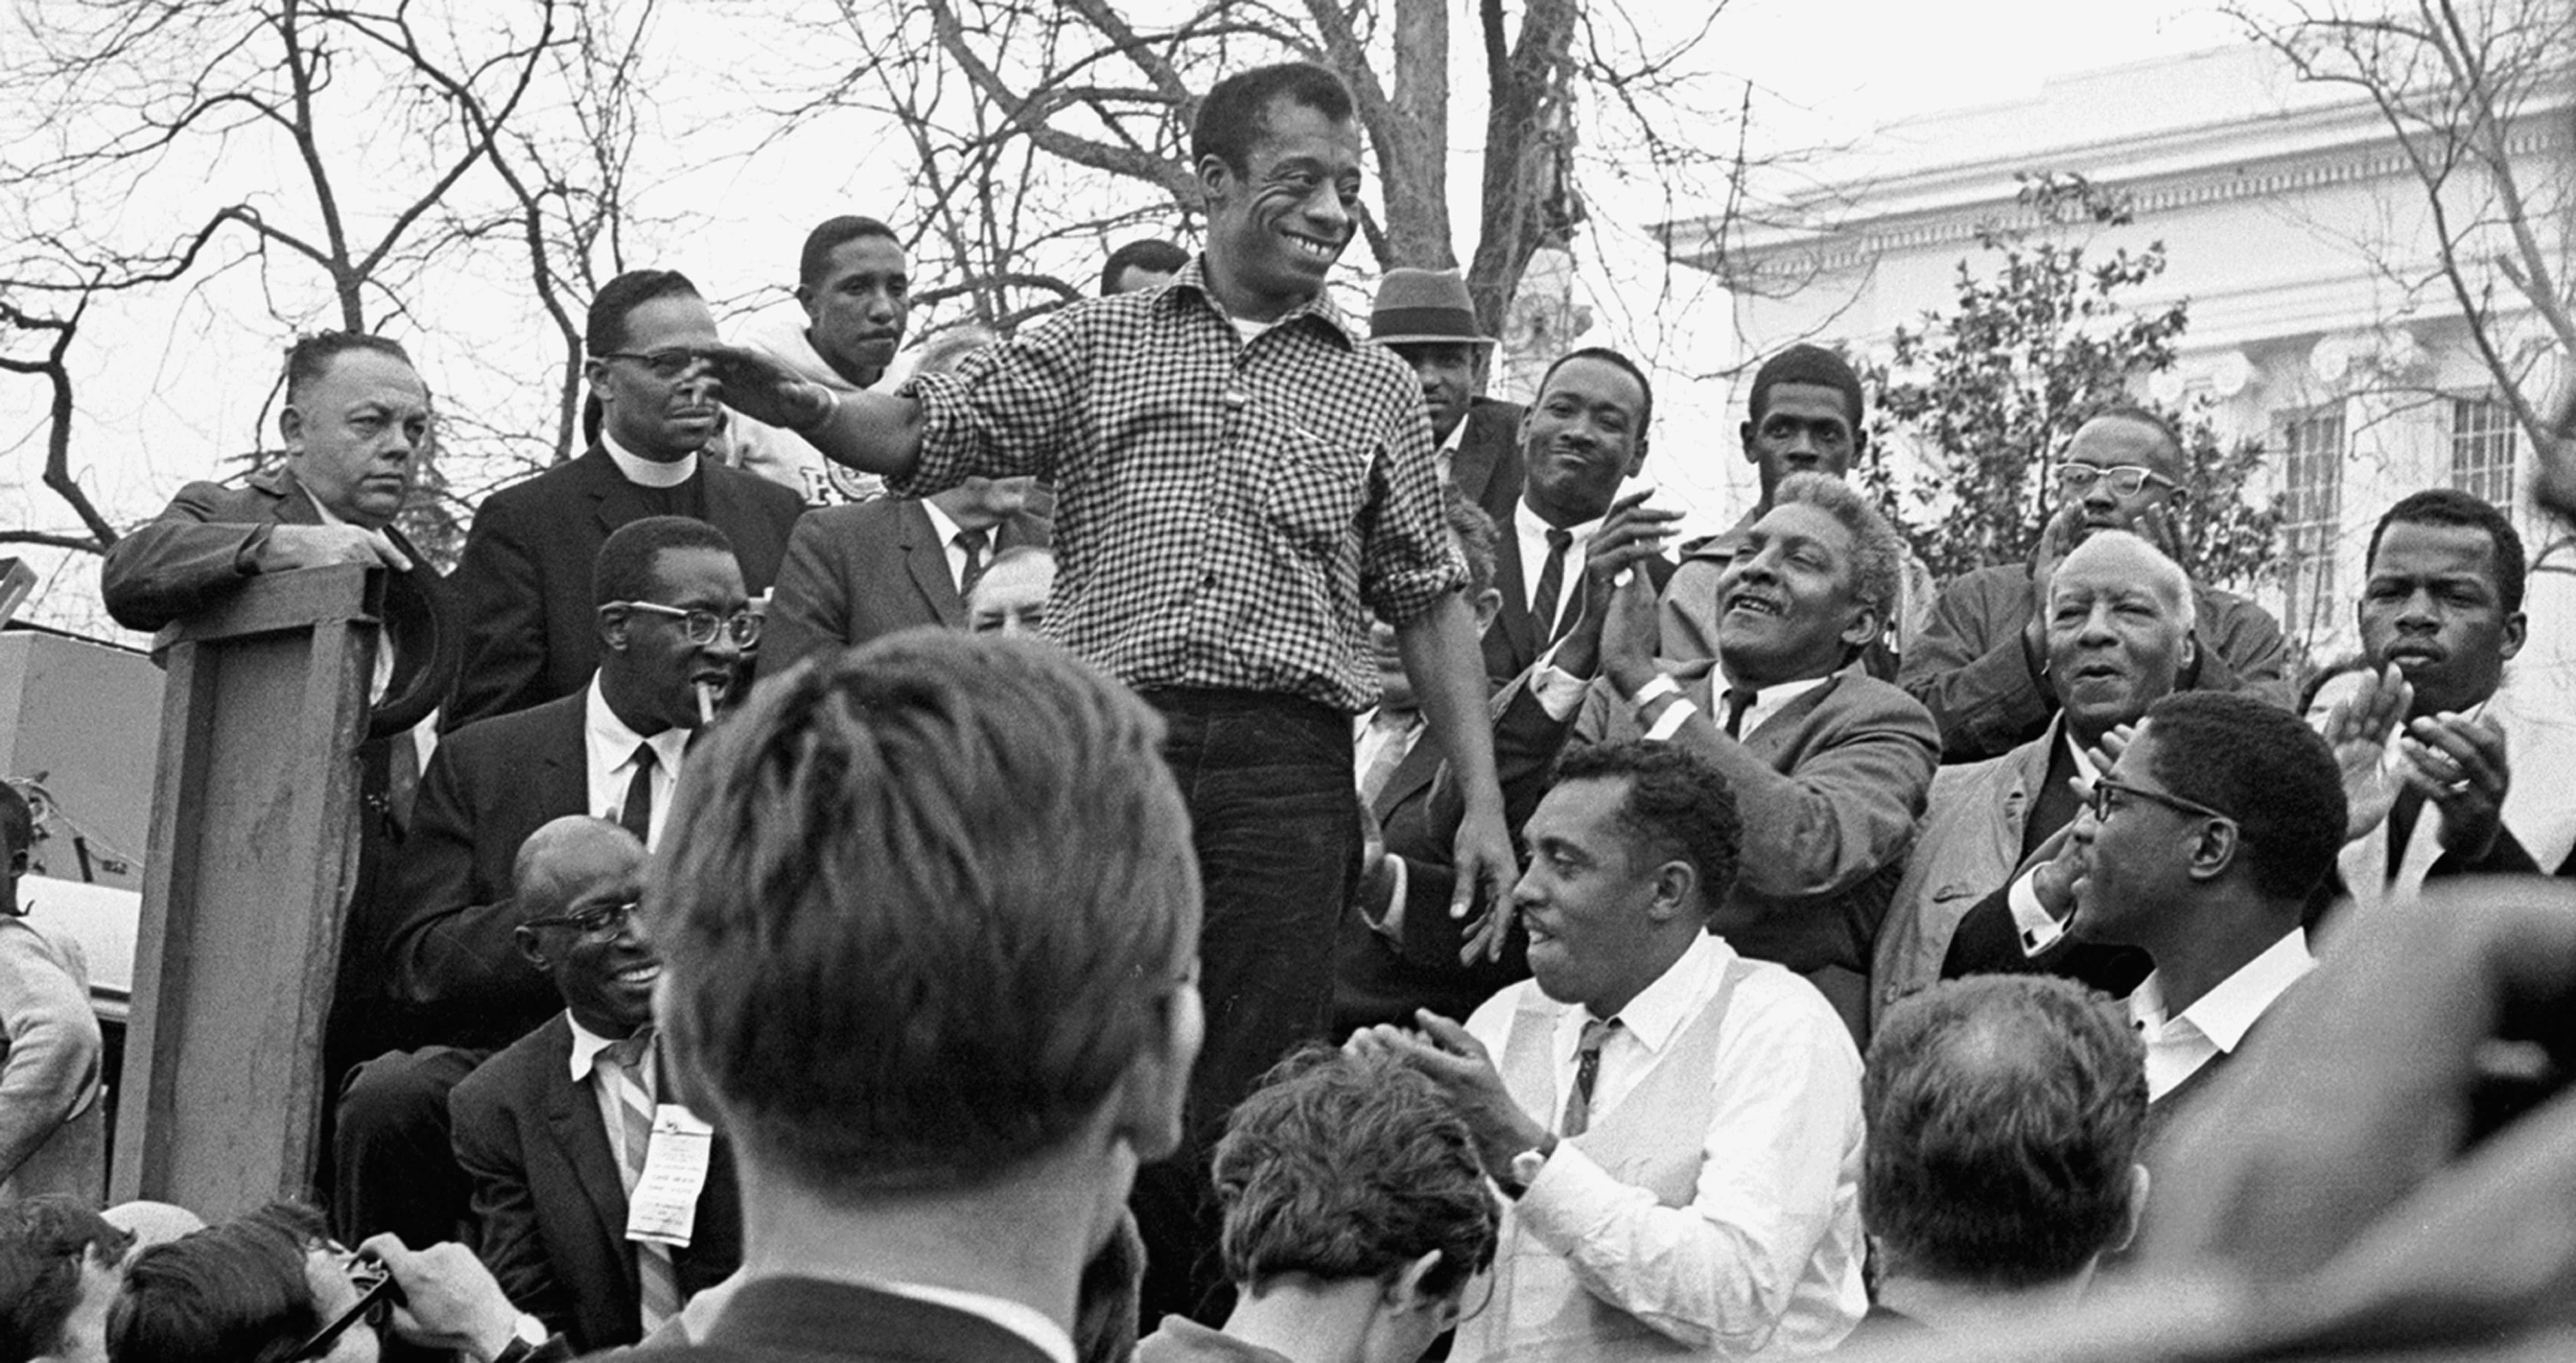 Photograph of James Baldwin speaking at the conclusion of the voting rights march from Selma to Montgomery, Alabama